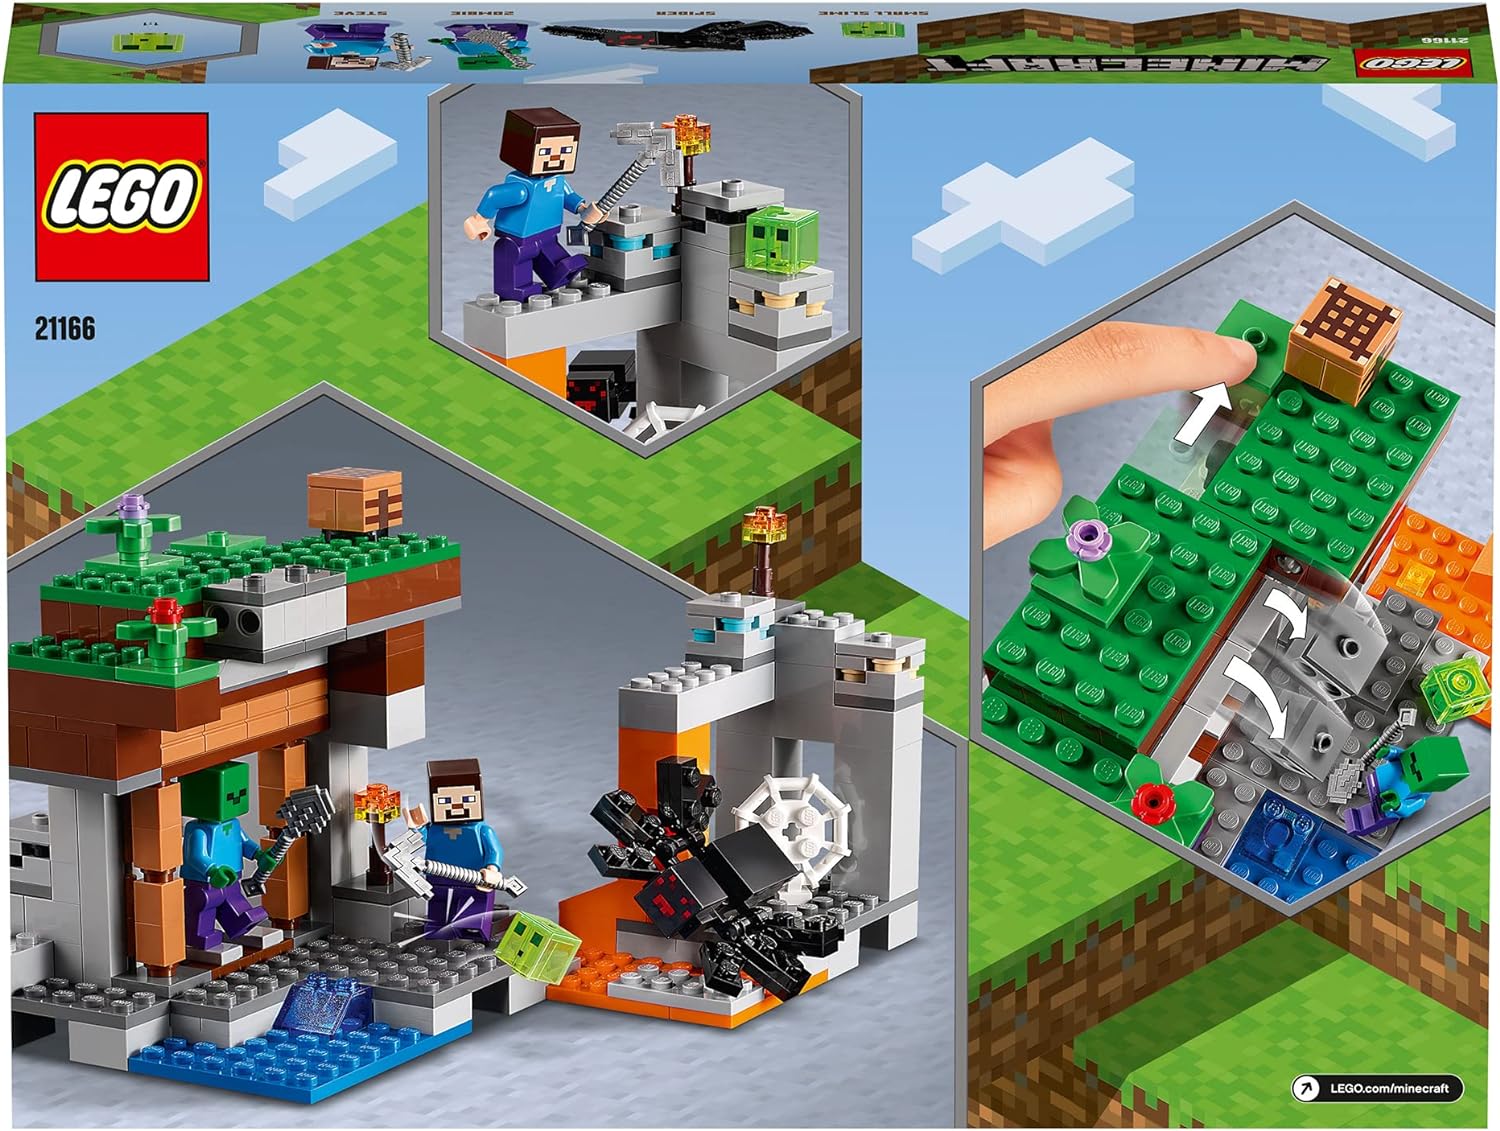 LEGO Minecraft ‘The Abandoned Mine’ 21166 Construction Set, Zombie Cave with Figures: Slime, Steve and Spider